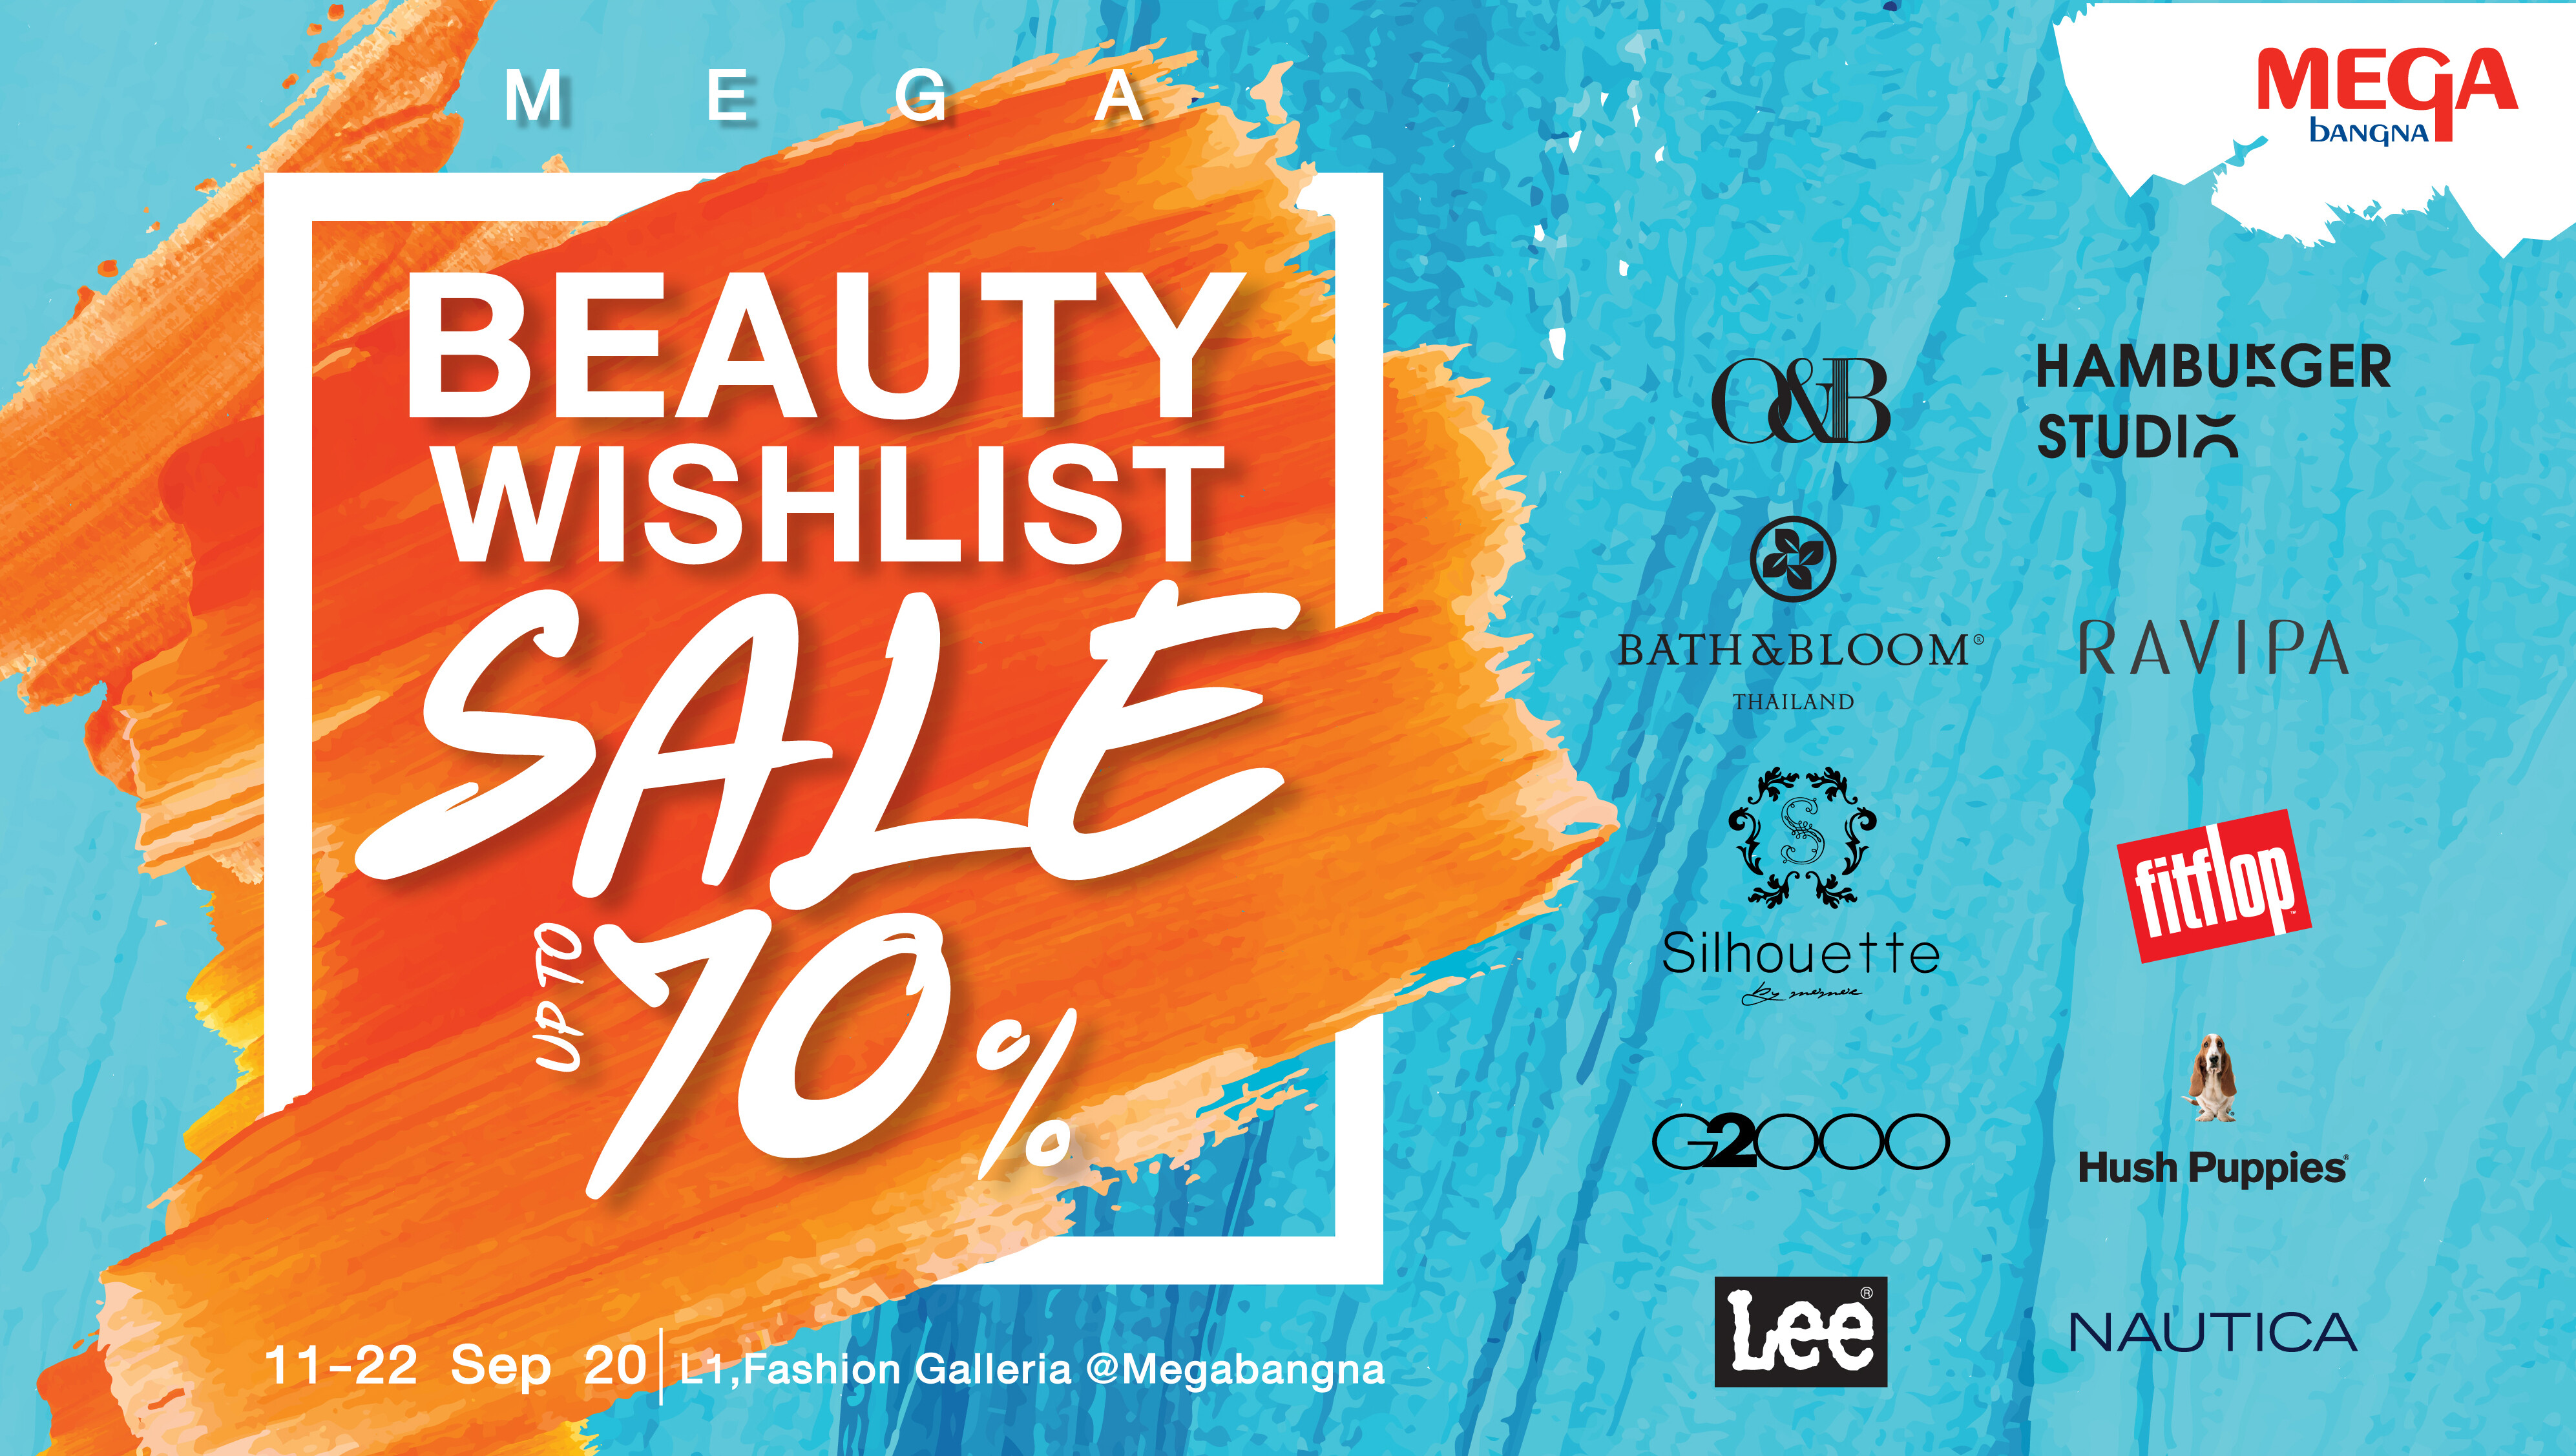 “Mega Beauty Wishlist” offers Up To 70% Off on Fashion and Beauty Items  11 – 22 September 2020 at L1st Fashion Galleria Zone at Megabangna